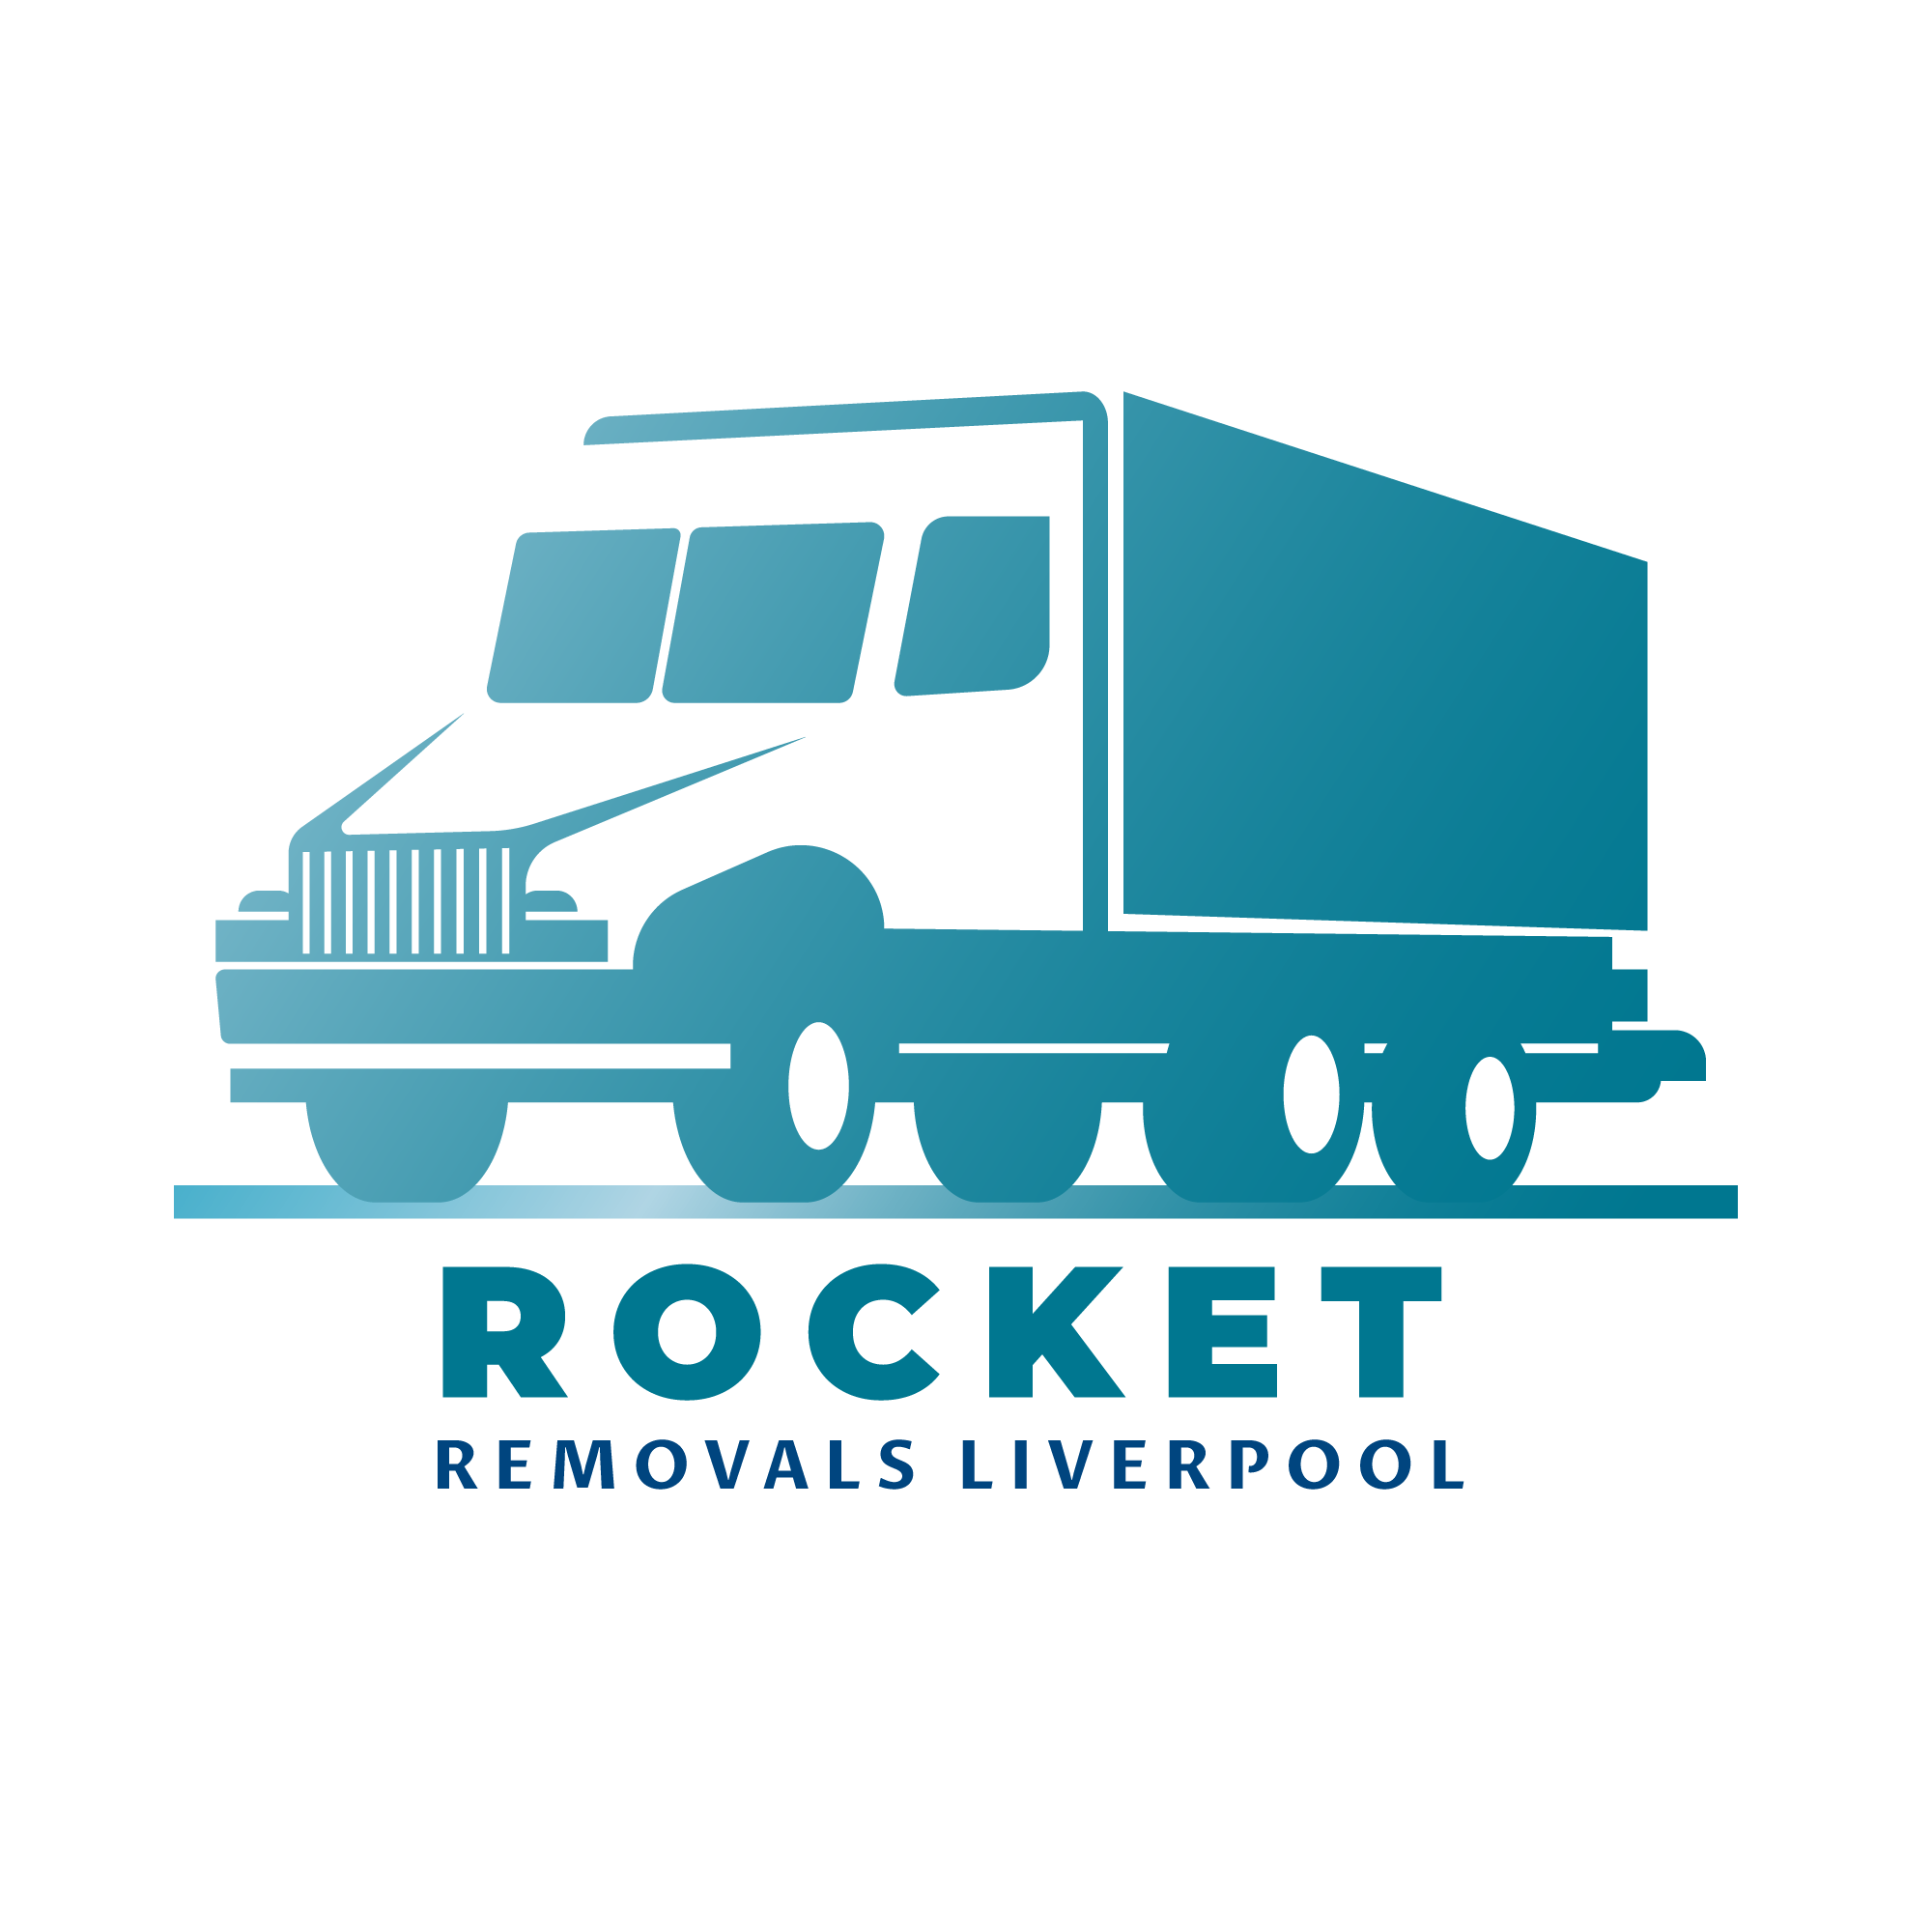 Rocket Removals Liverpool Boasts Positive Reviews from Clients 1